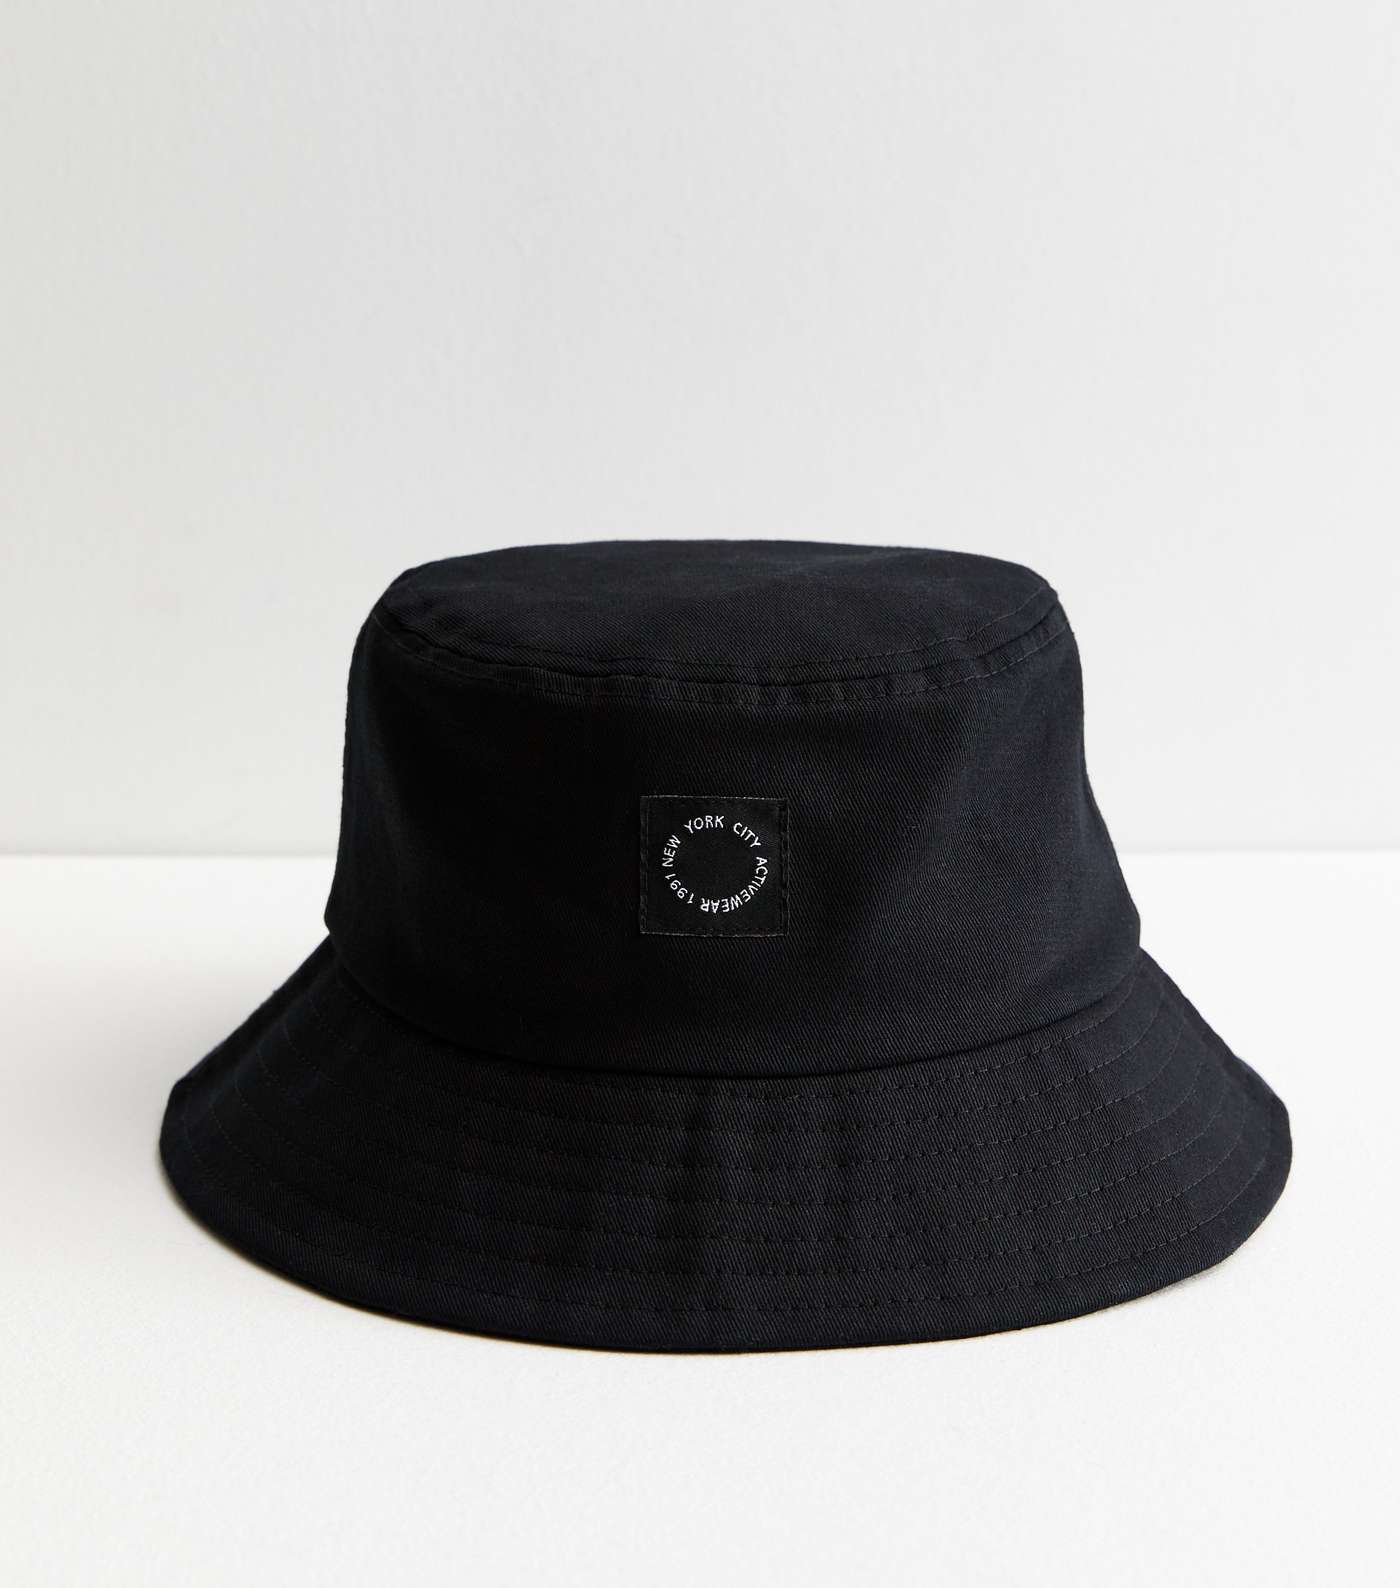 Black Embroidered New York City Bucket Hat Image 2